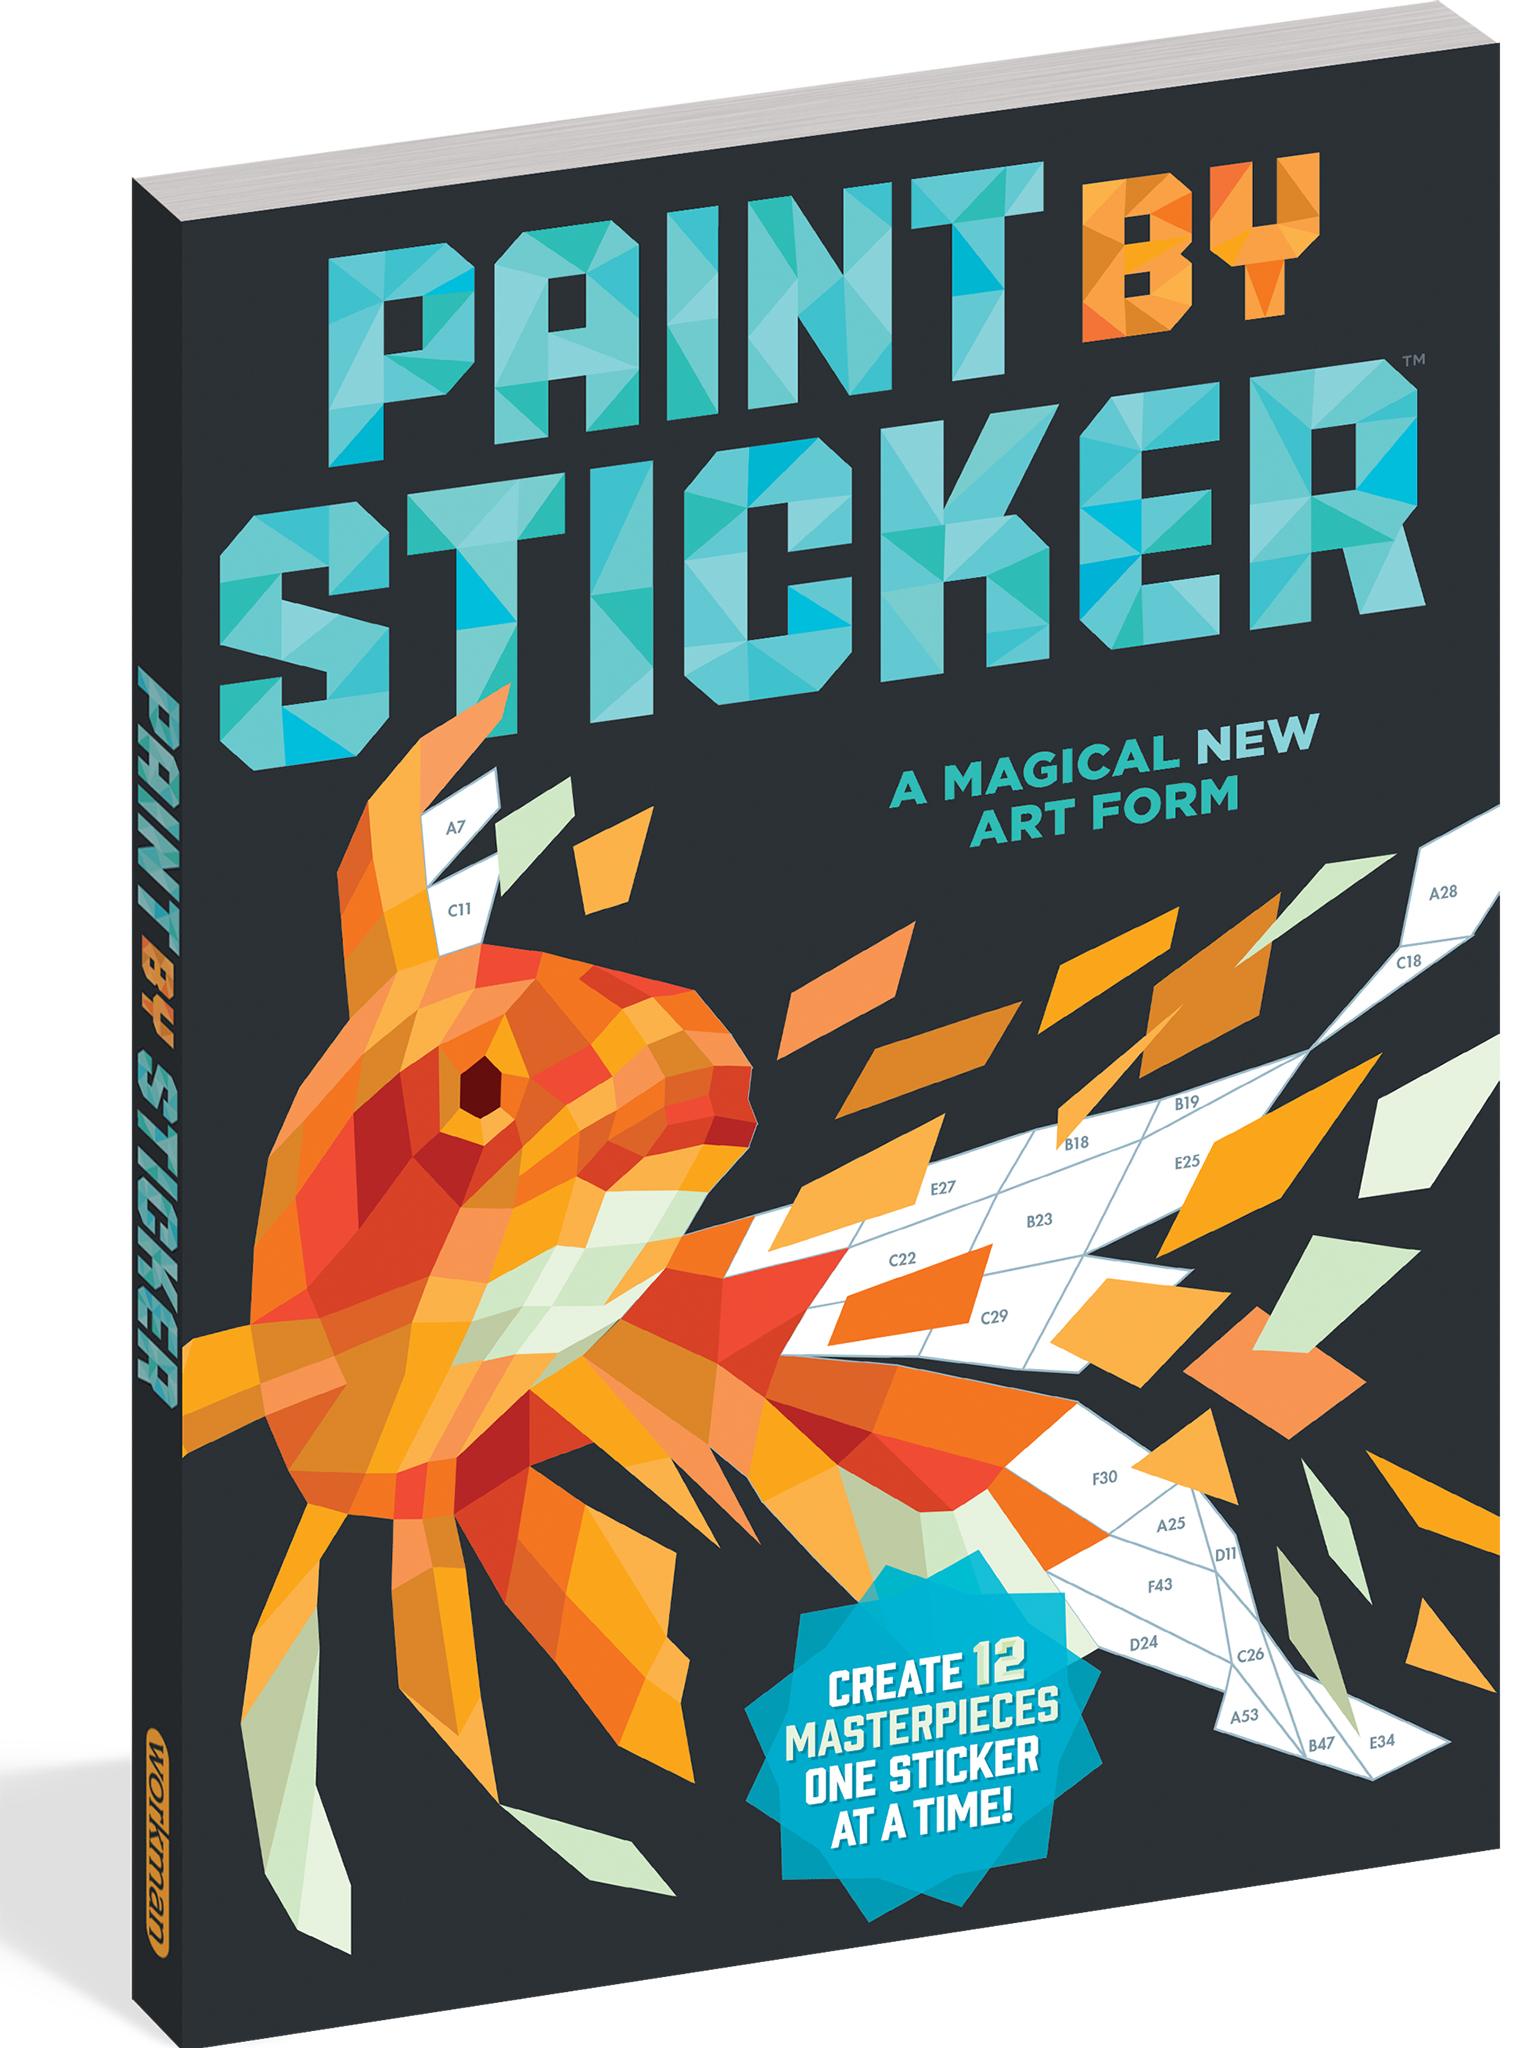 Adult sticker books could be the new adult colouring books